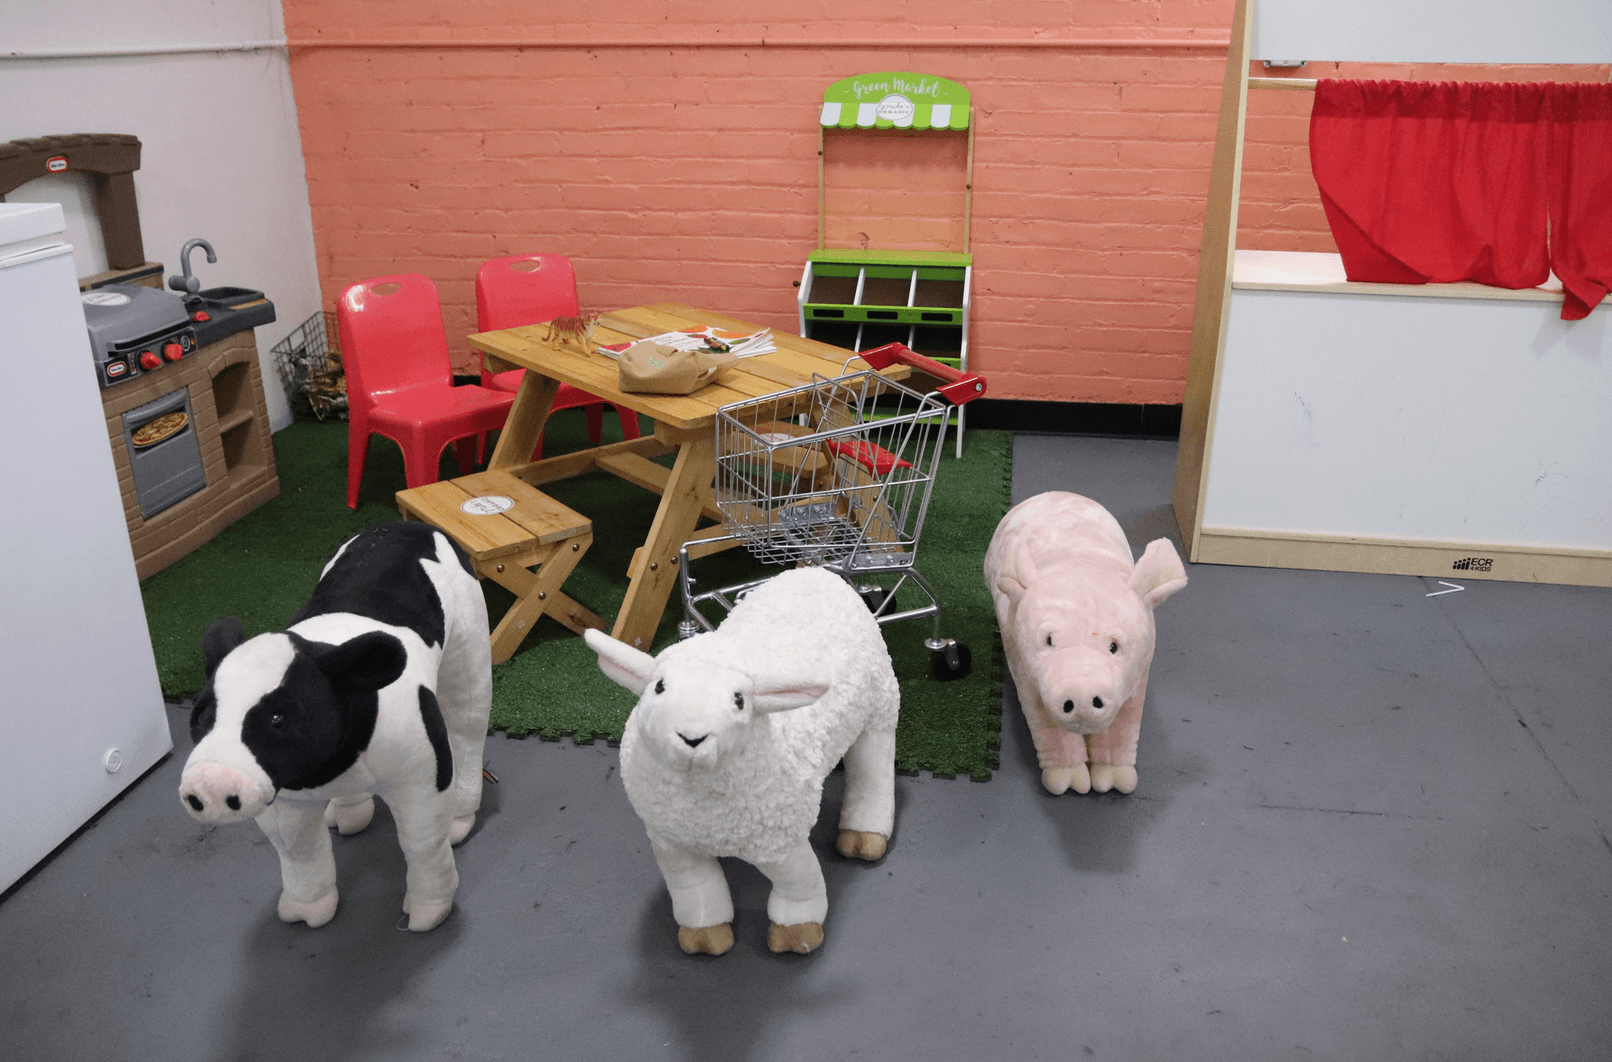 Mike's Organic Market offers kid sized shopping carts and a children's play area. Photo: Leslie Yager